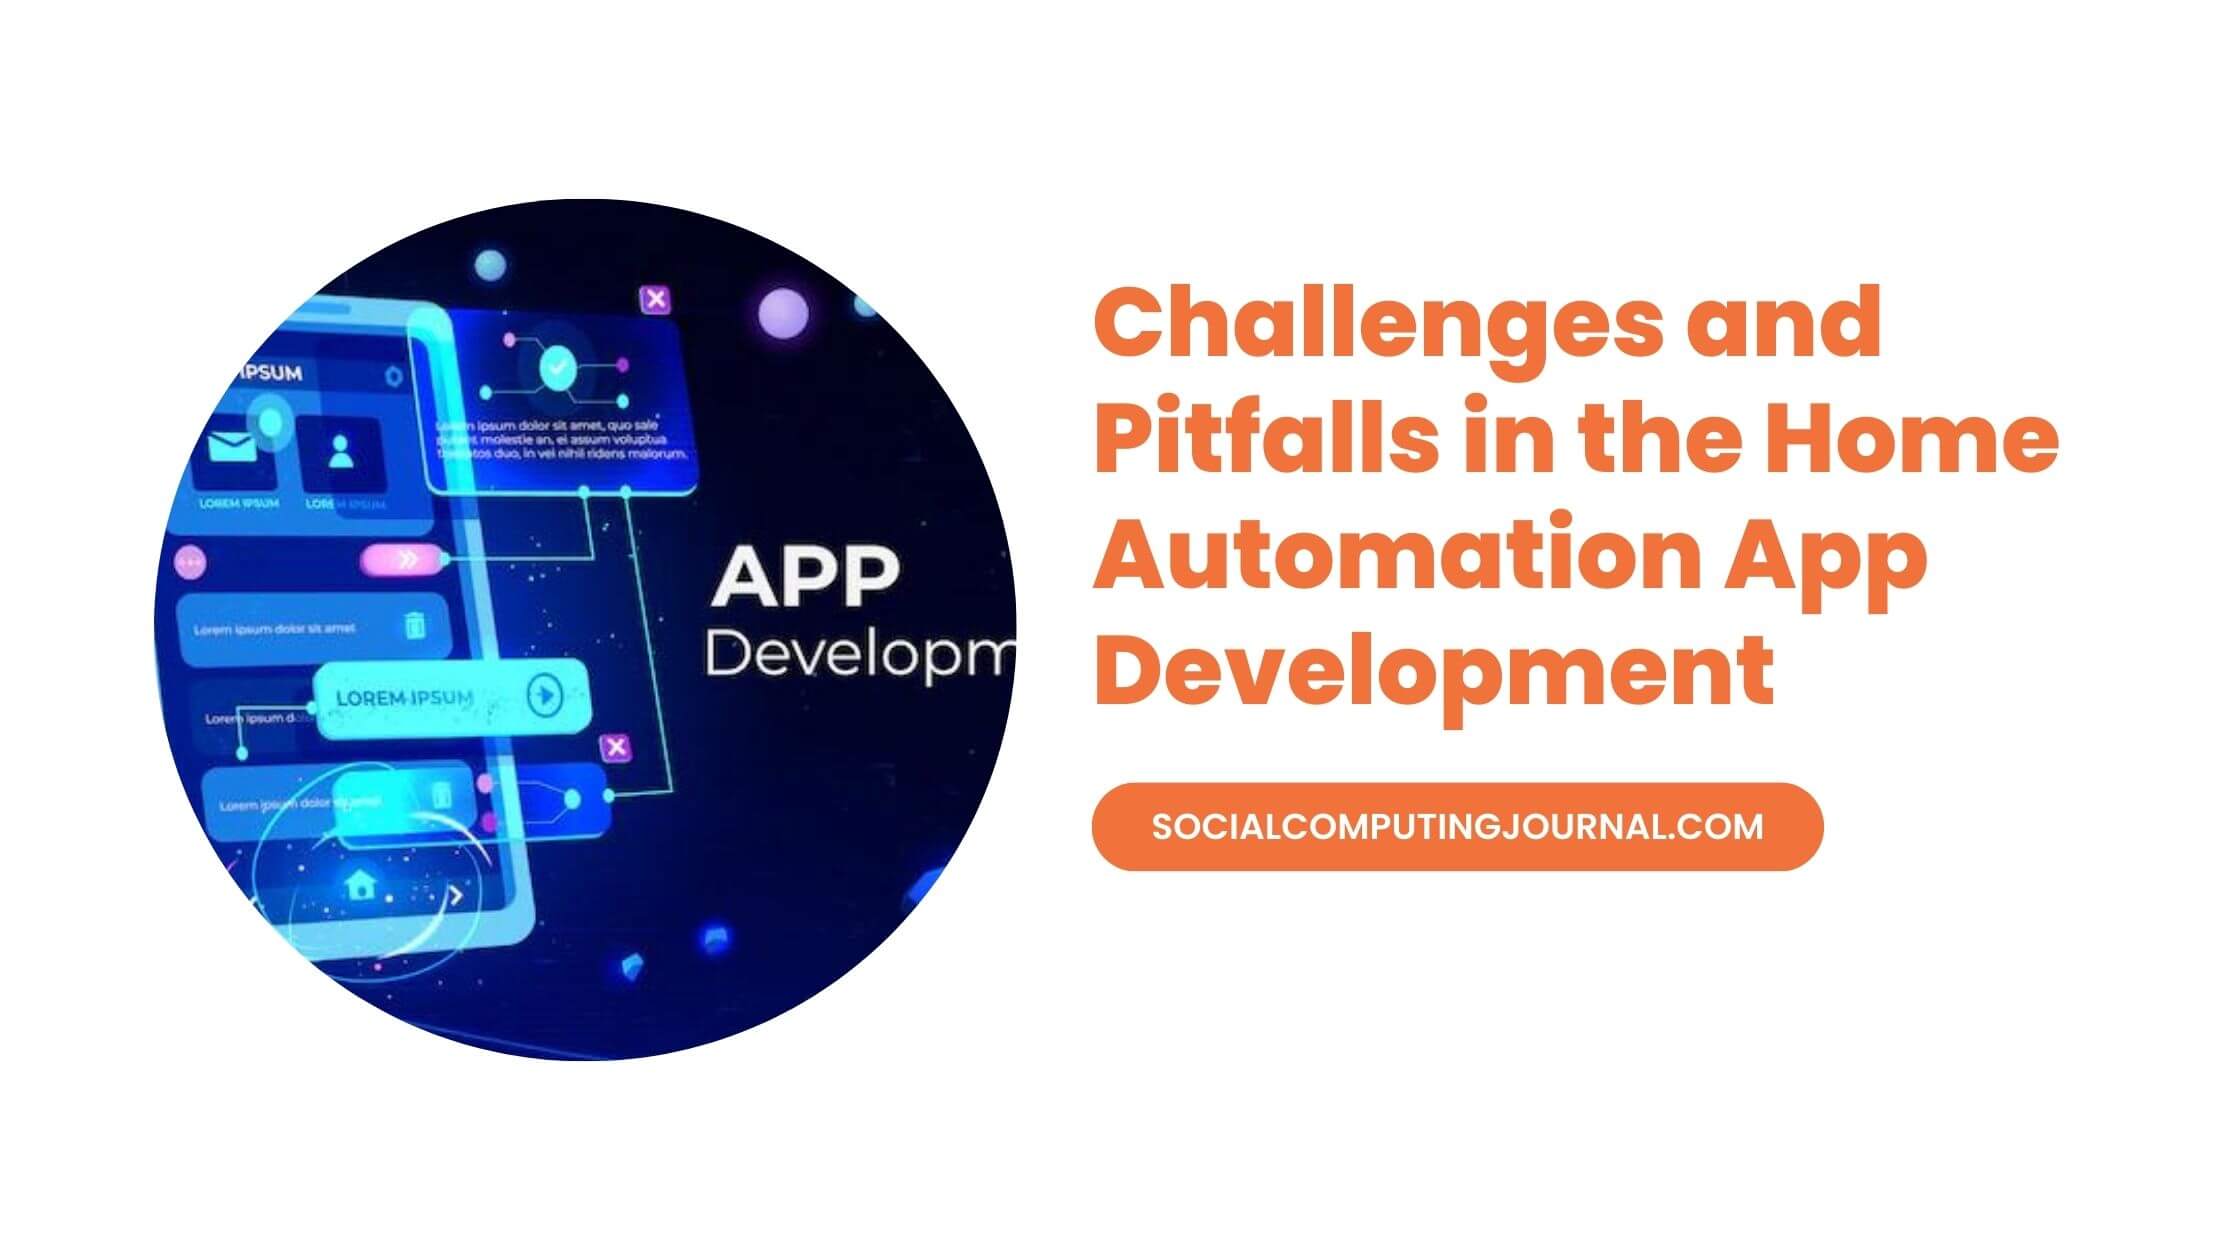 Challenges and Pitfalls in the Home Automation App Development